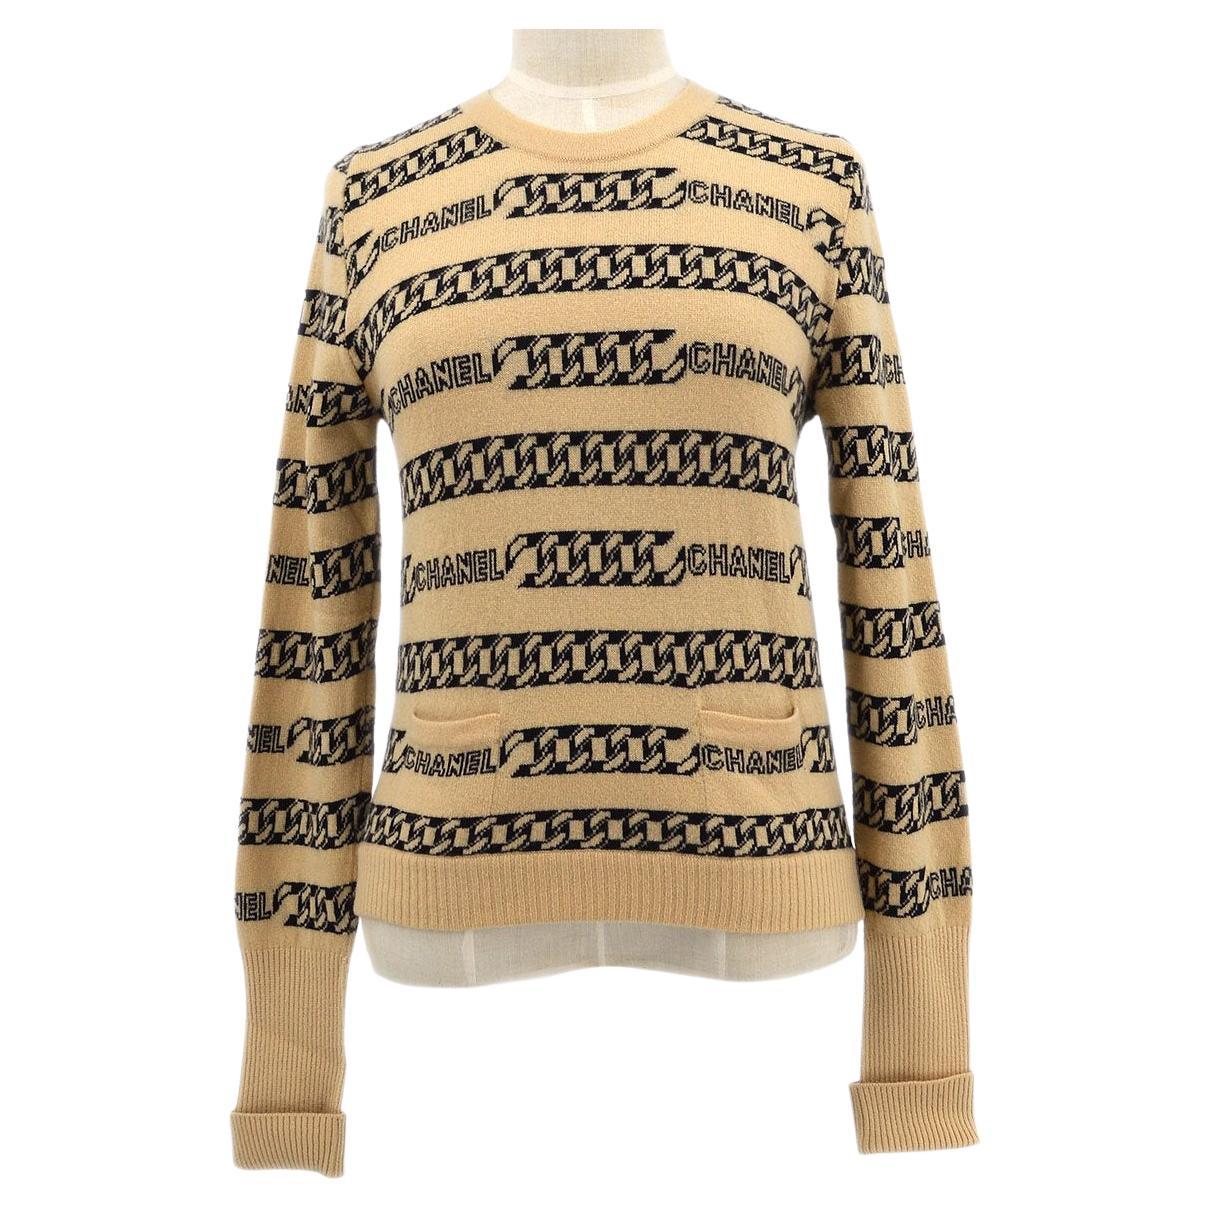 Chanel 2014 Cashmere Sweater - Neutrals Knitwear, Clothing - CHA913486